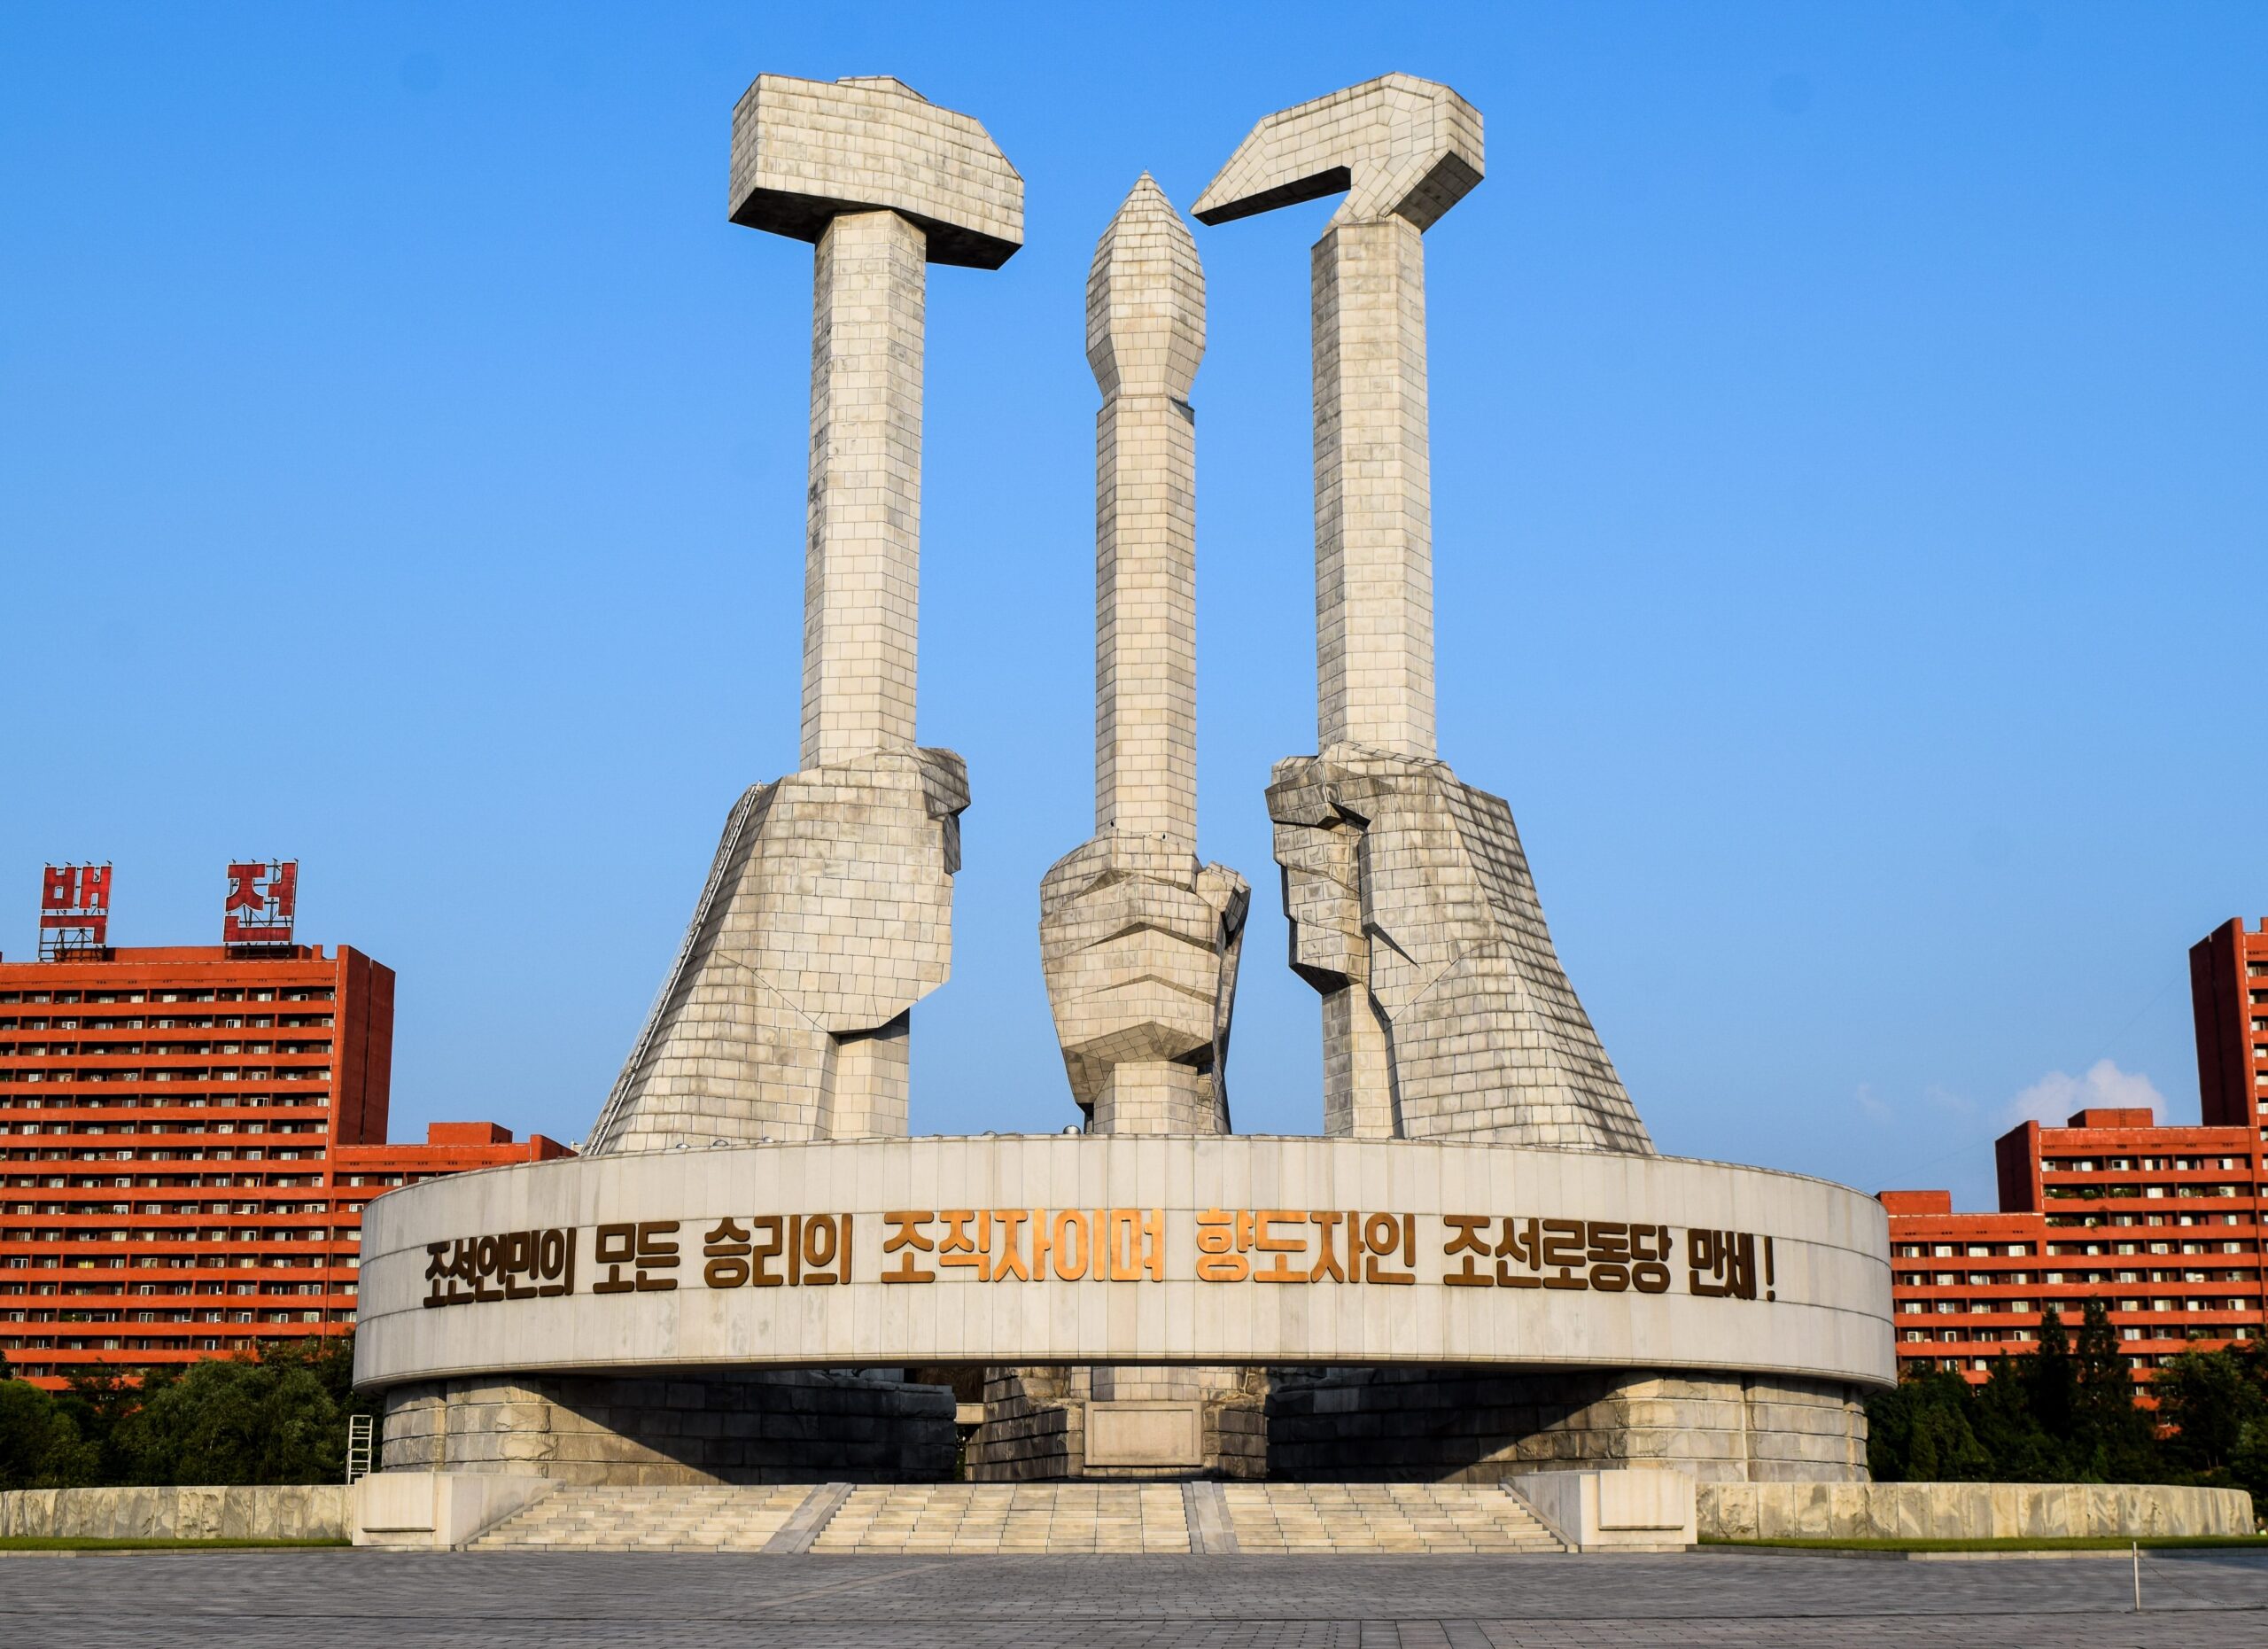 Monument to Party Founding, Pyongyang, North Korea